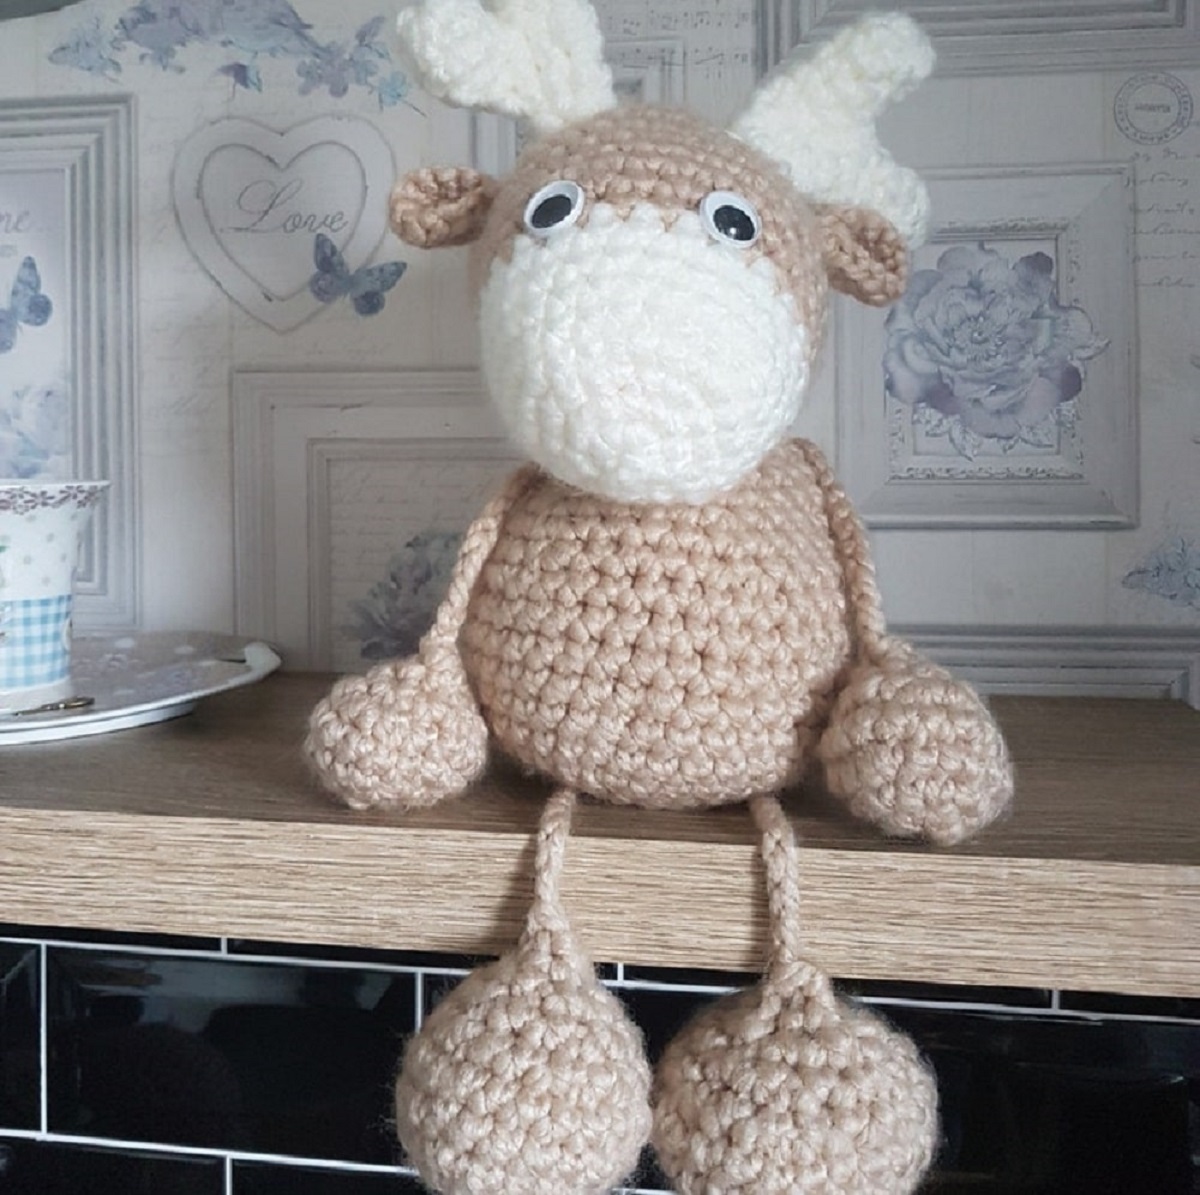 A large brown crochet reindeer with a white nose and antlers and oversized feet sitting on a wooden shelf.